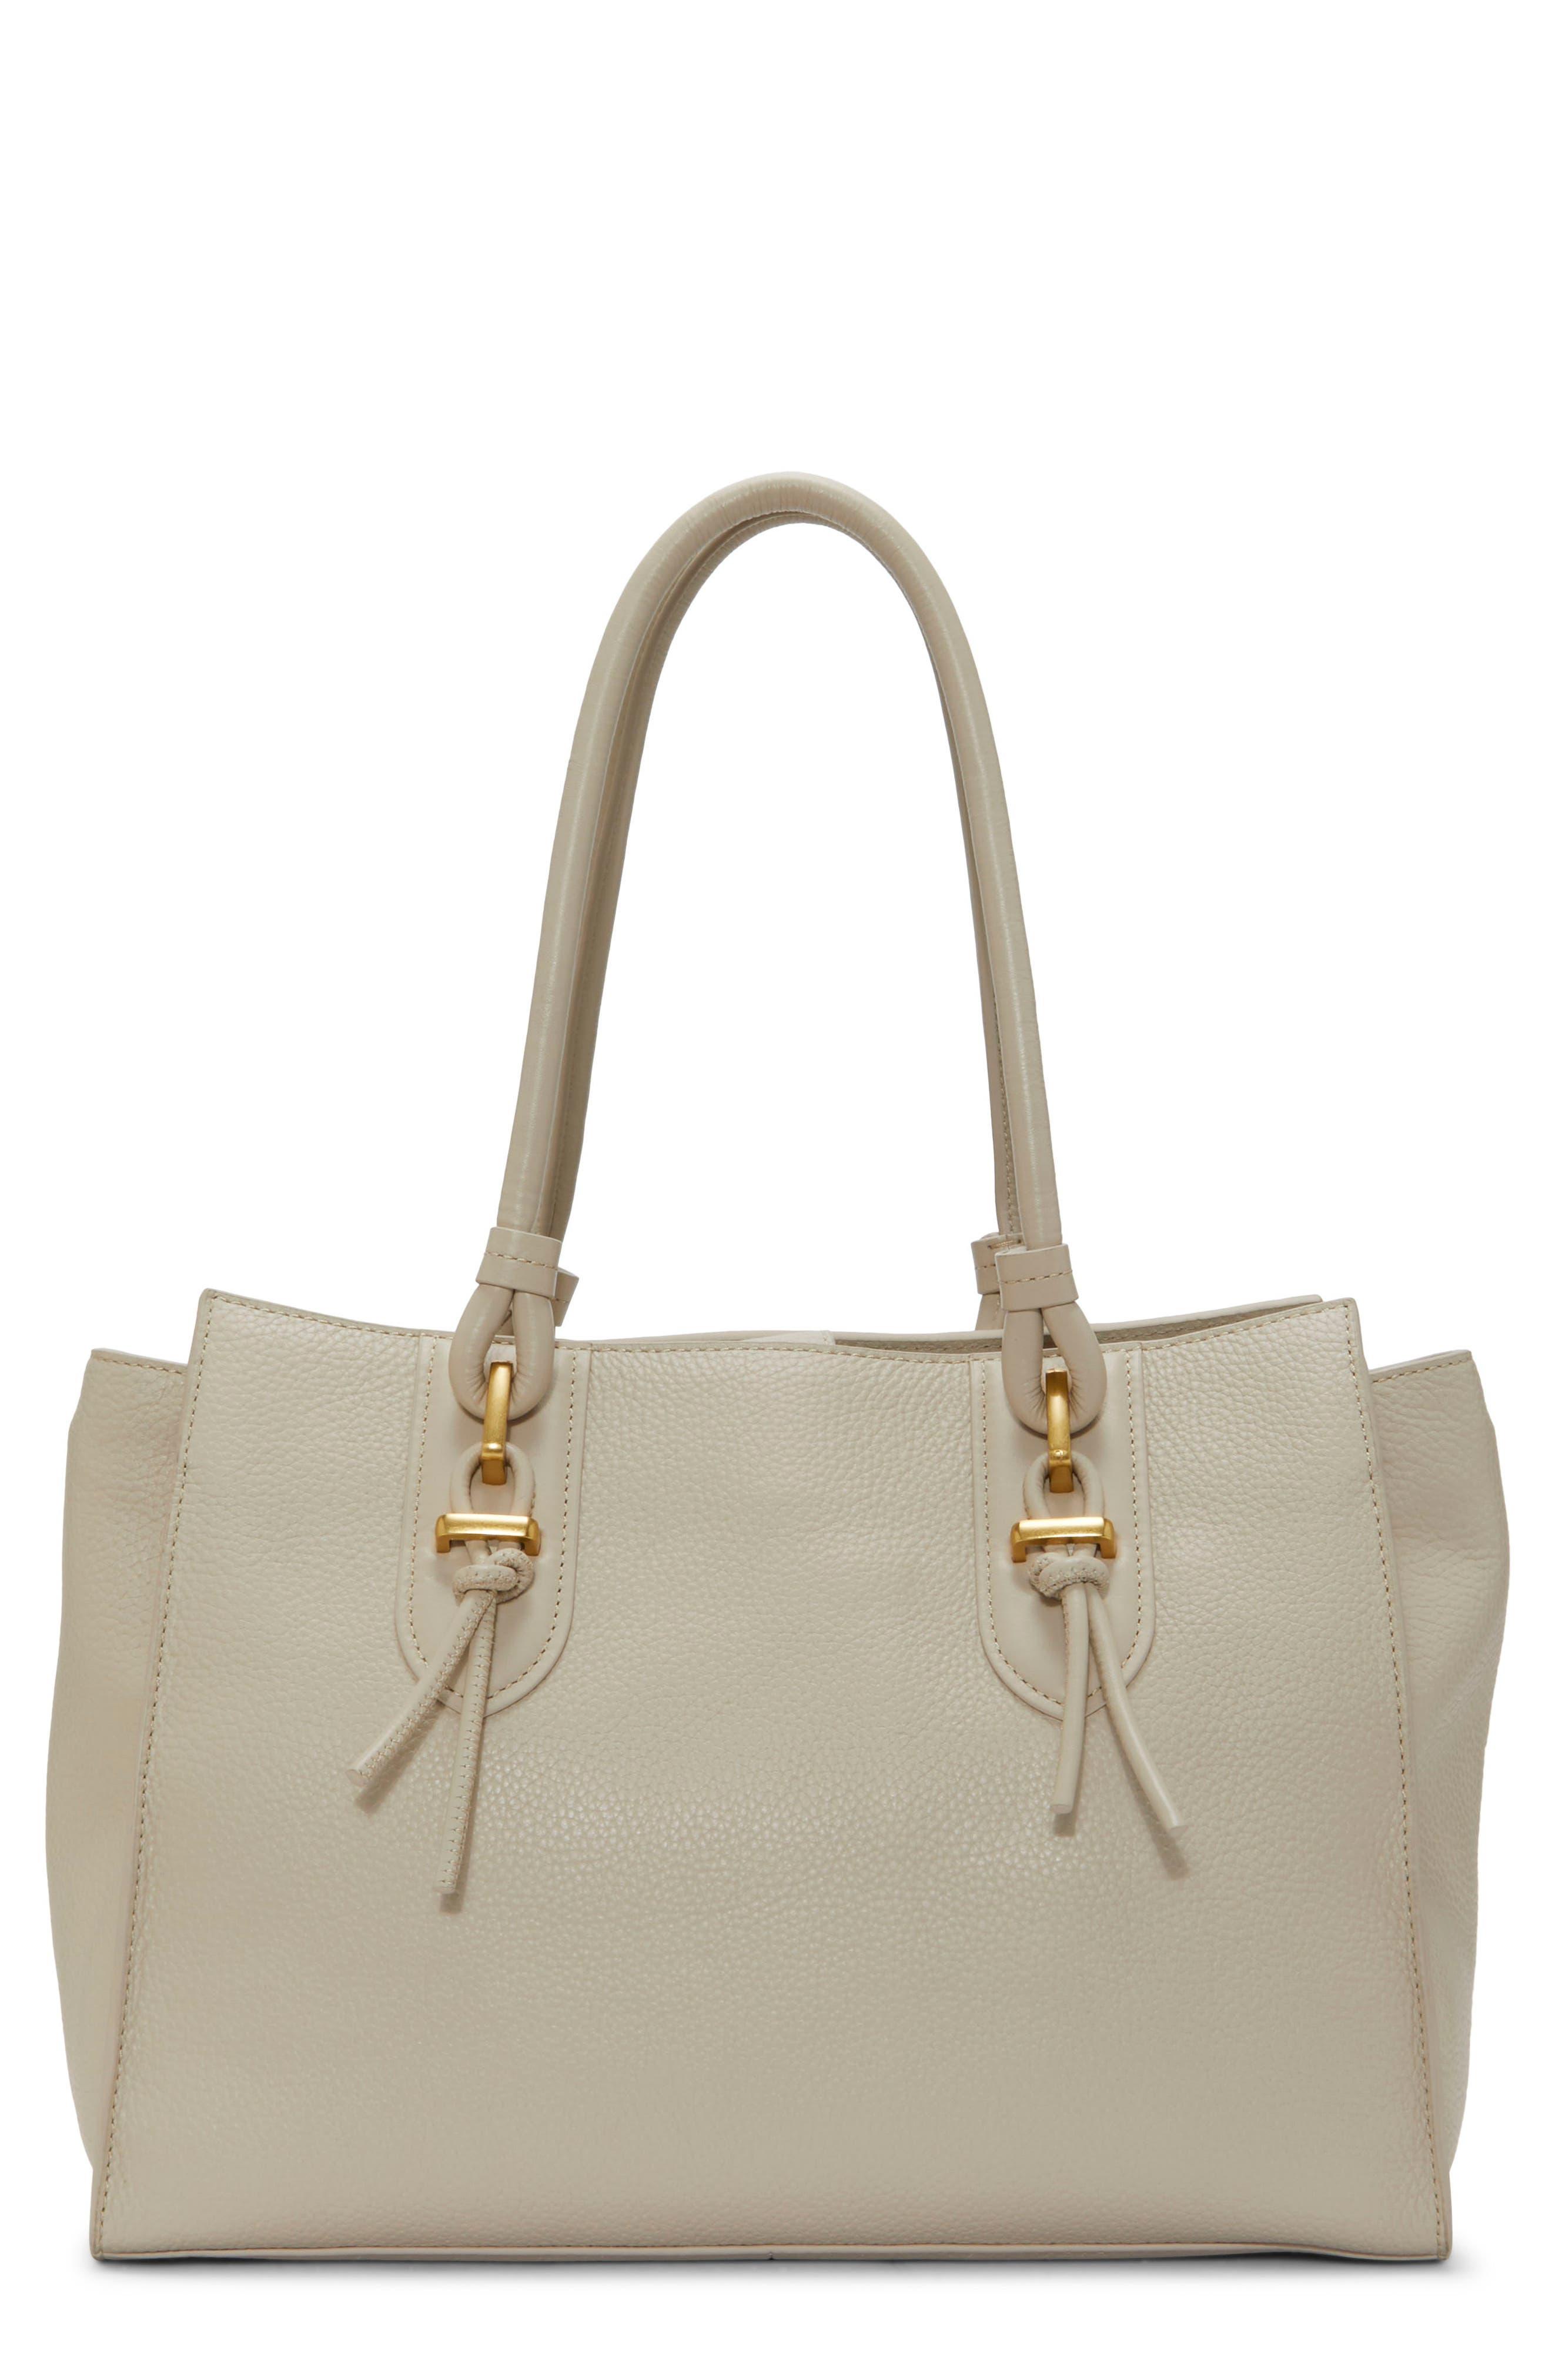 Vince Camuto Maecy Leather Tote in Natural | Lyst